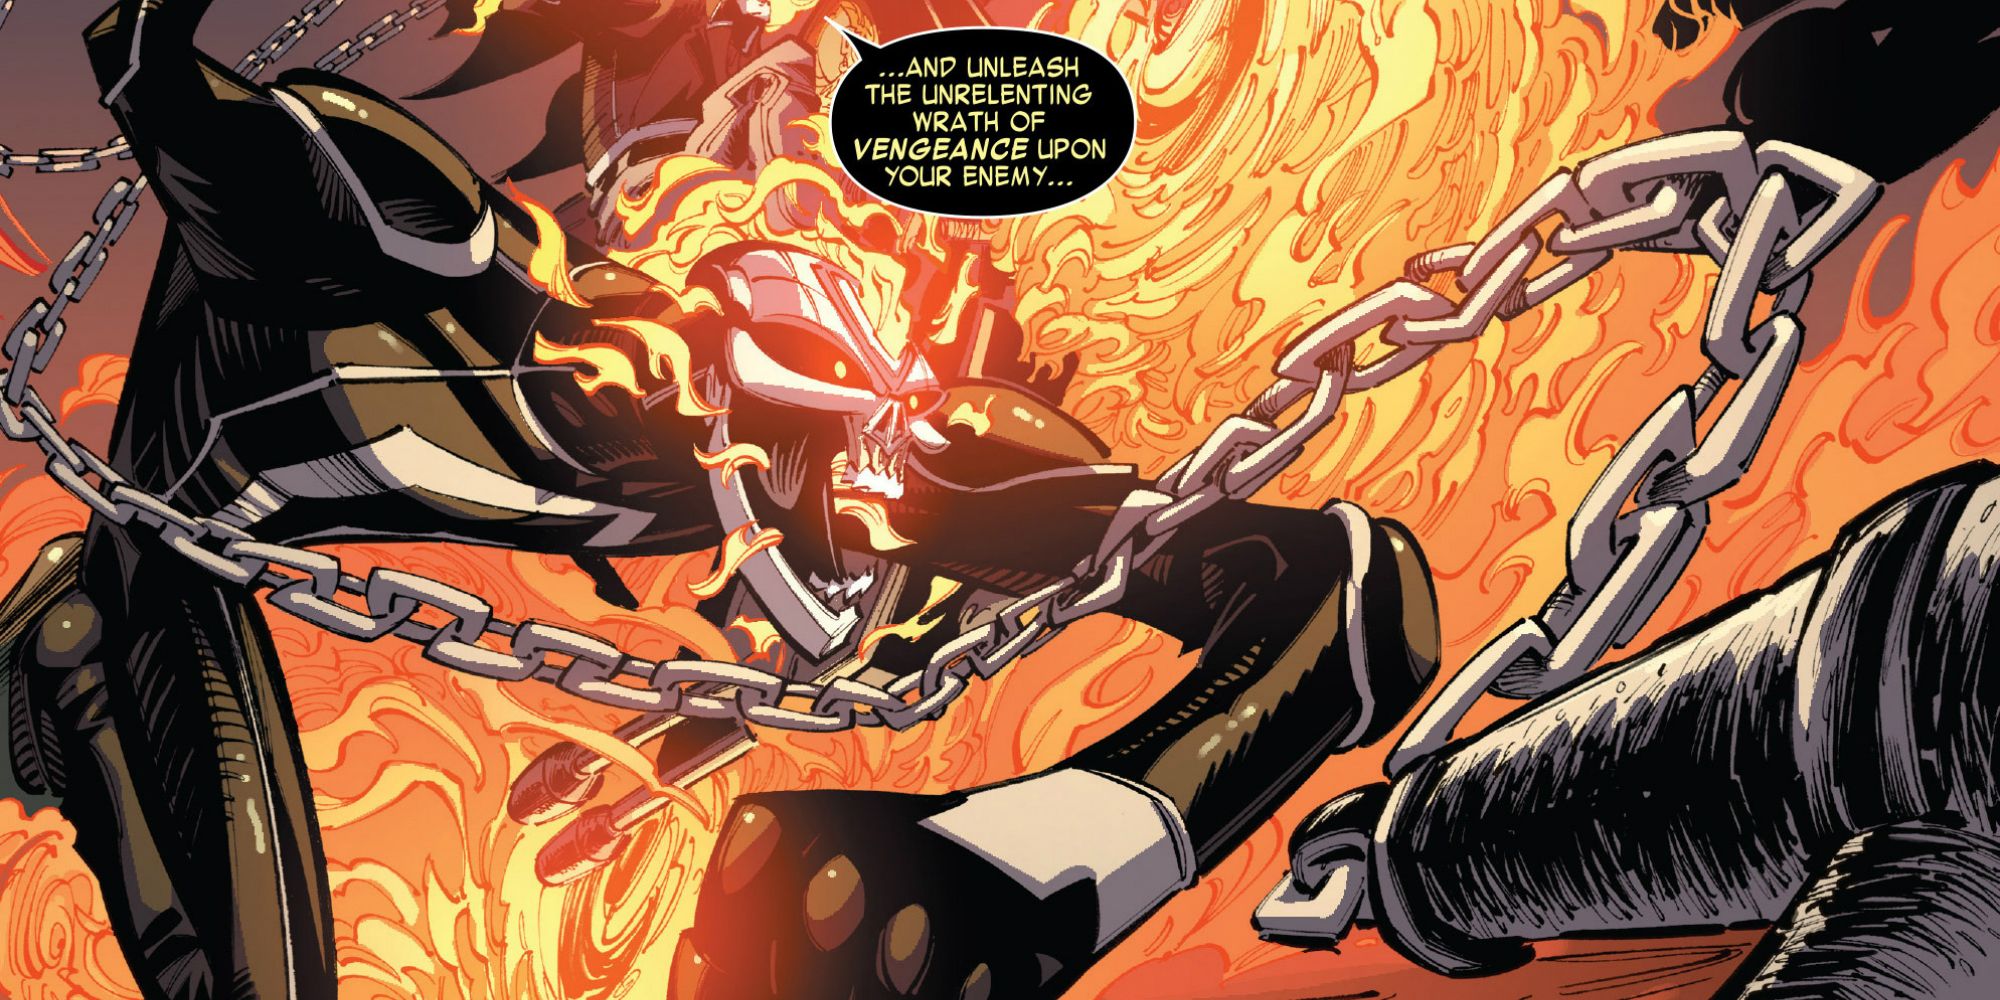 Gabriel Luna talks Ghost Rider and Robbie Reyes on Agents of S.H.I.E.L.D..